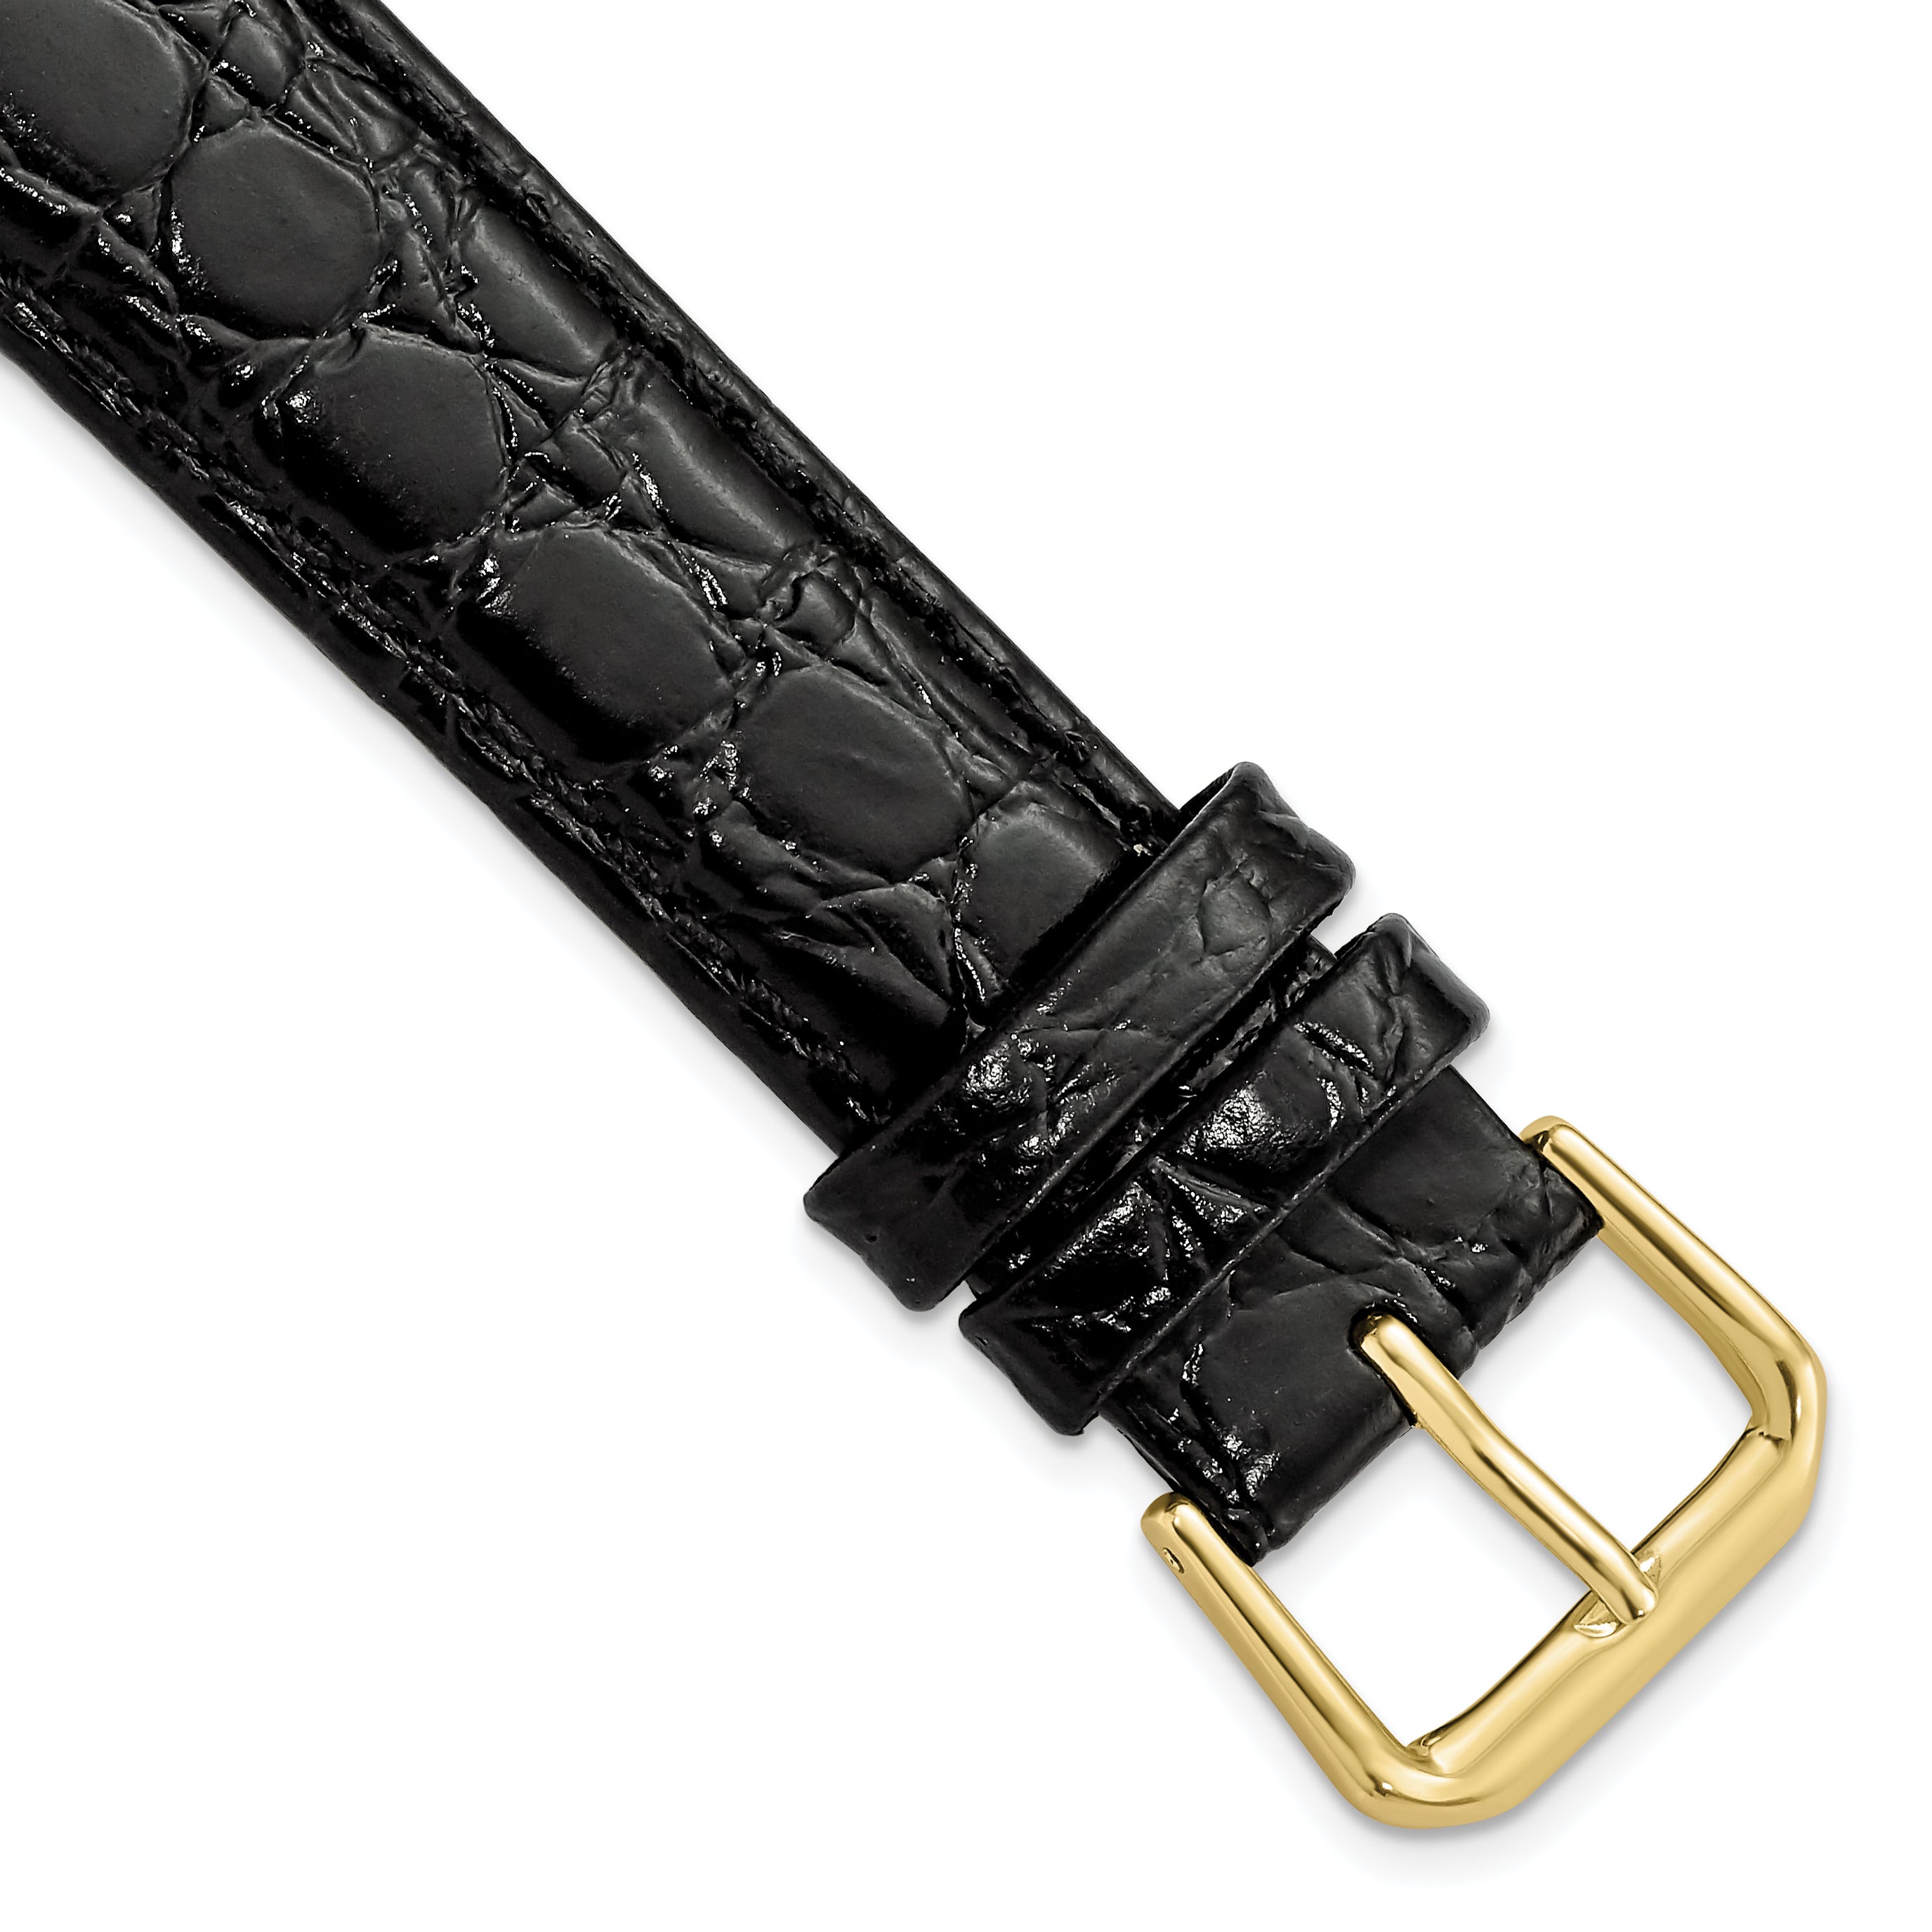 DeBeer 19mm Long Black Alligator Grain Leather with Gold-tone Buckle 8.5 inch Watch Band